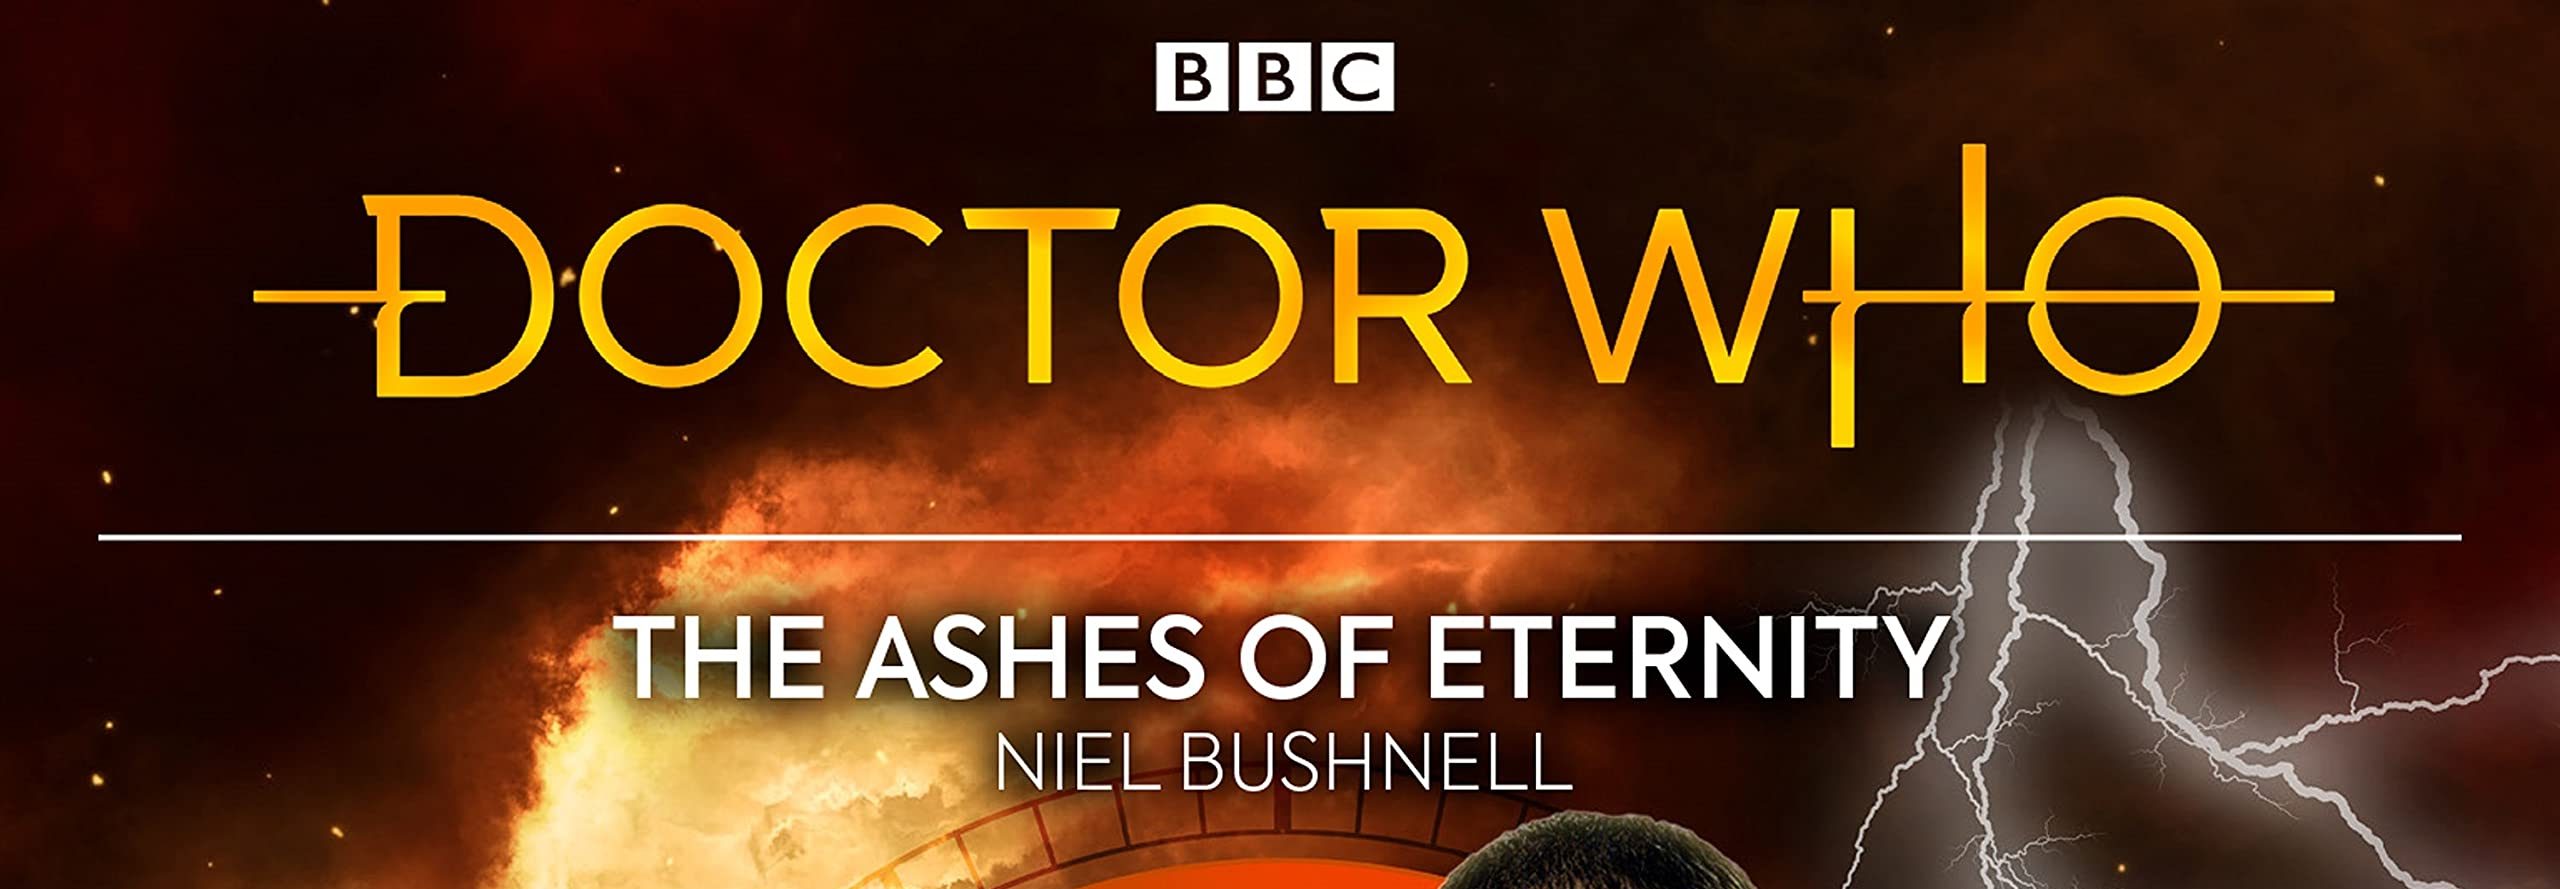 Doctor Who: The Ashes of Eternity cover